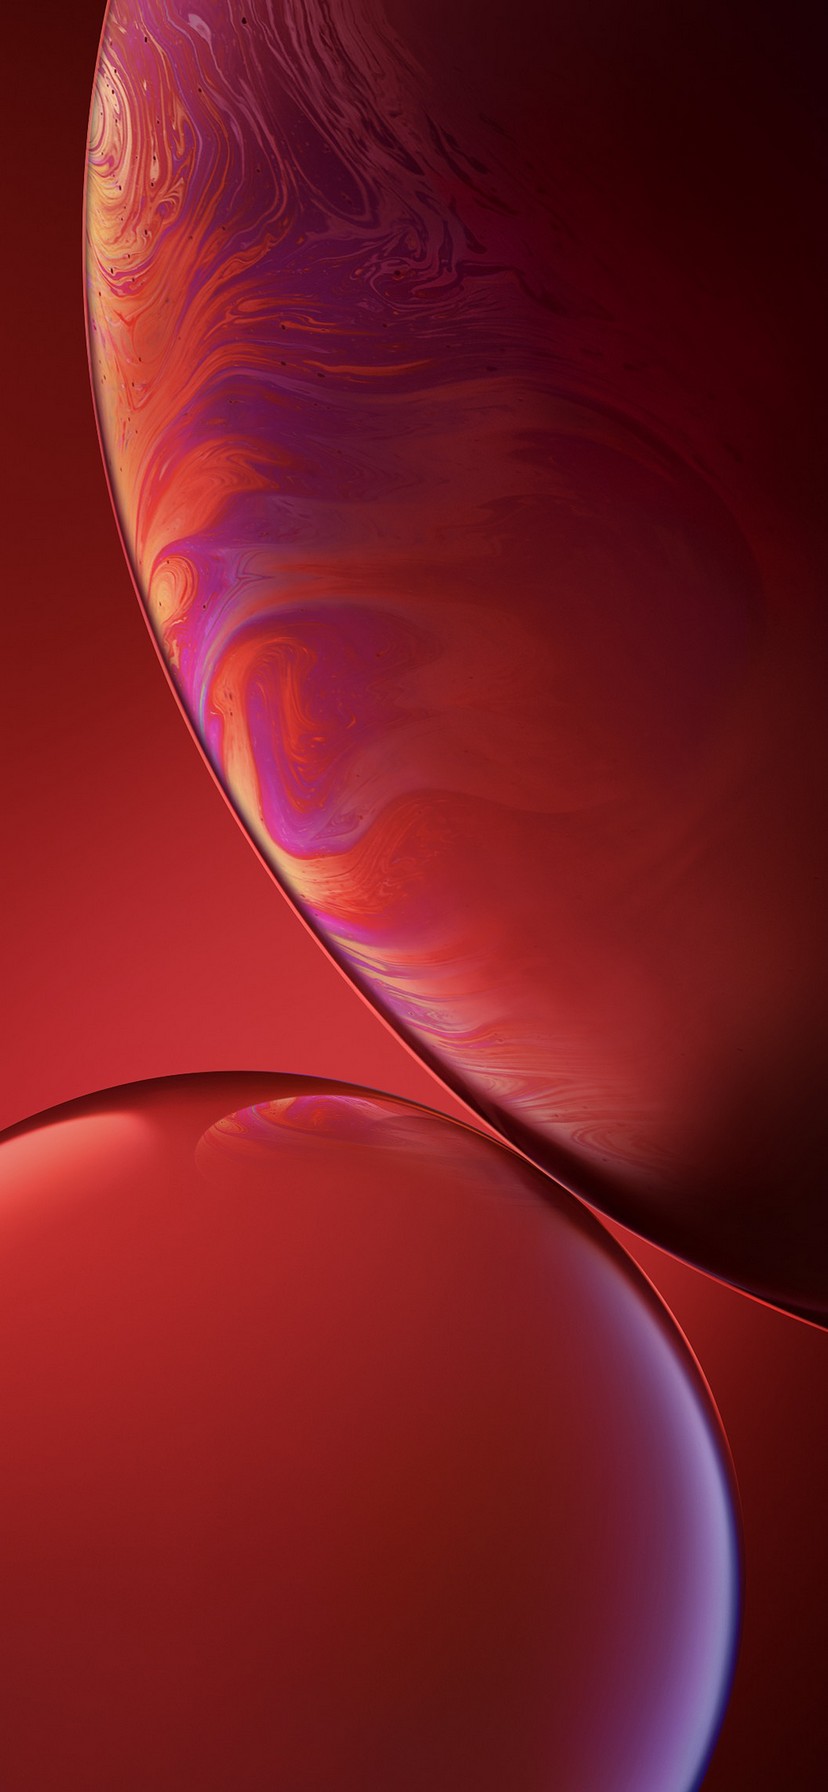 iPhone XR Wallpaper Design With high-resolution 828X1792 pixel. You can set as wallpaper for Apple iPhone X, XS Max, XR, 8, 7, 6, SE, iPad. Enjoy and share your favorite HD wallpapers and background images